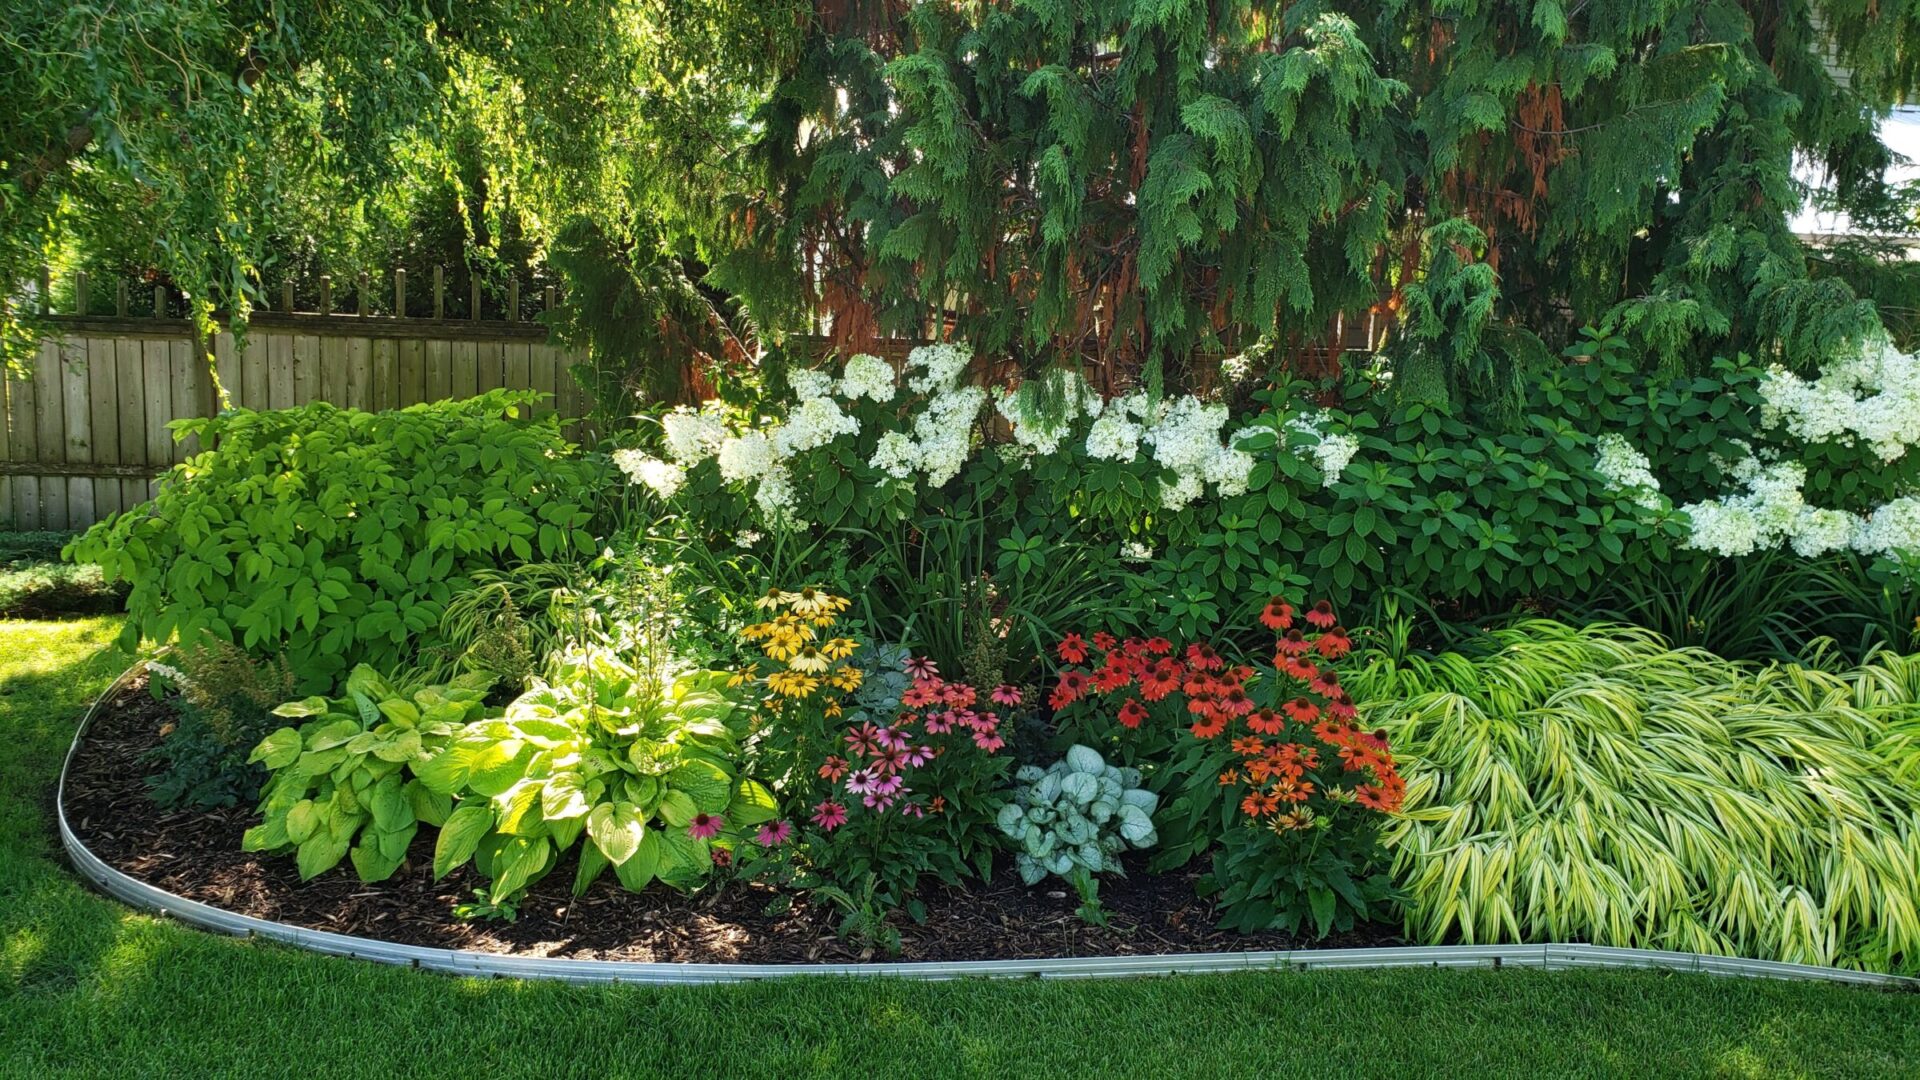 A beautifully landscaped garden with vibrant flowers, lush shrubs, and a wooden fence under a clear sky. Rich greenery creates a serene outdoor environment.